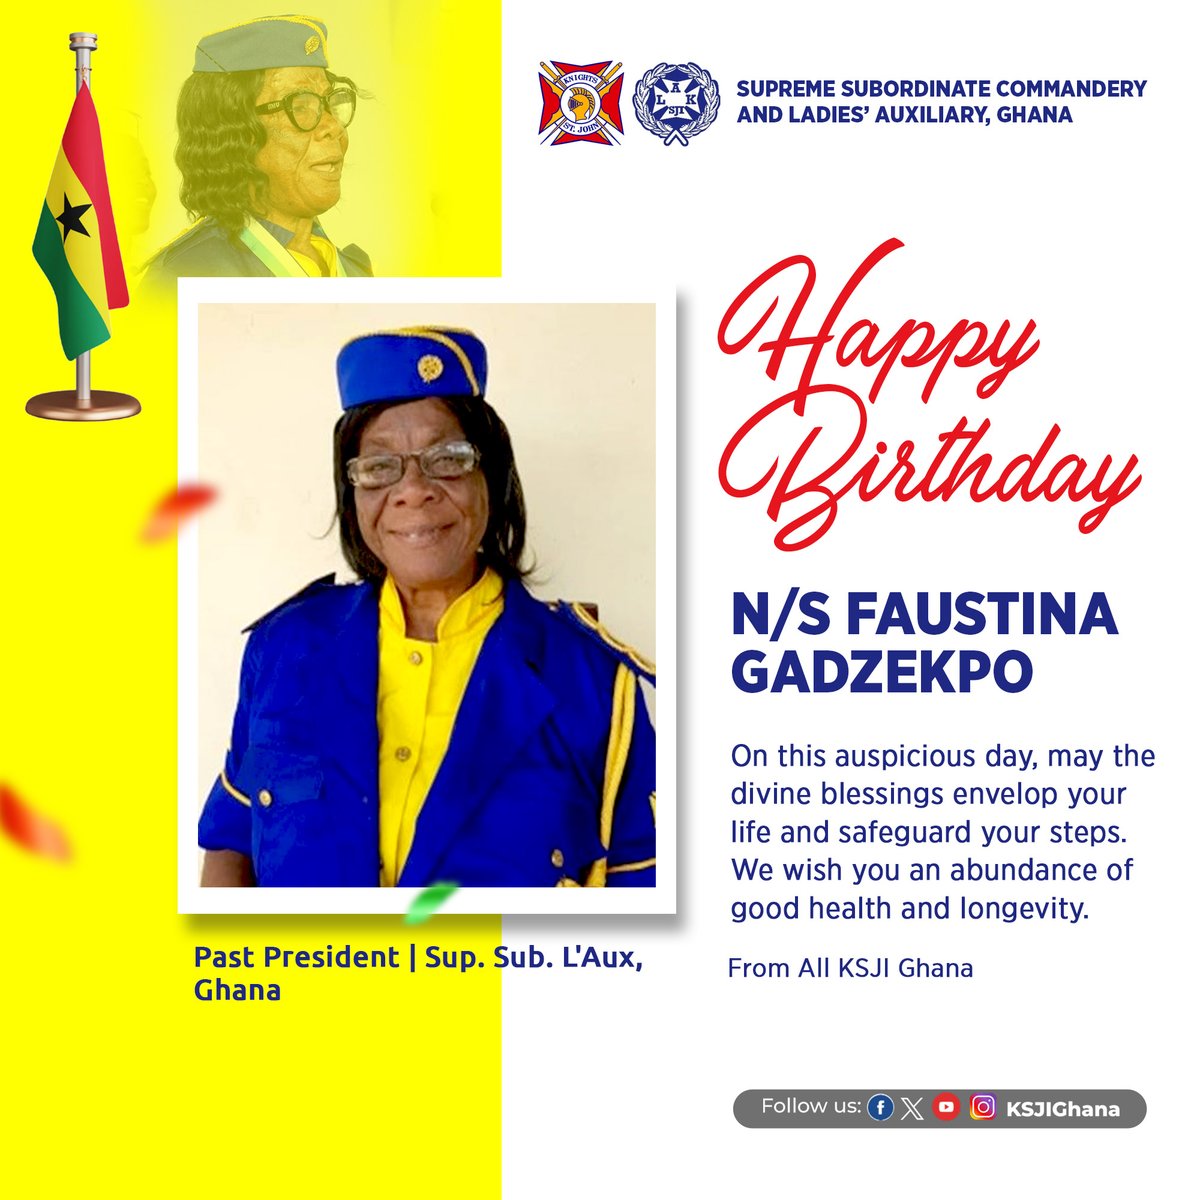 Today, we celebrate the birthday of N/S Faustina Gadzekpo. Happy Birthday, N/S! May the Lord bless you abundantly and keep you under His loving care.

#KSJIGhana | #CatholicFaithful | #ForGodAndCountry